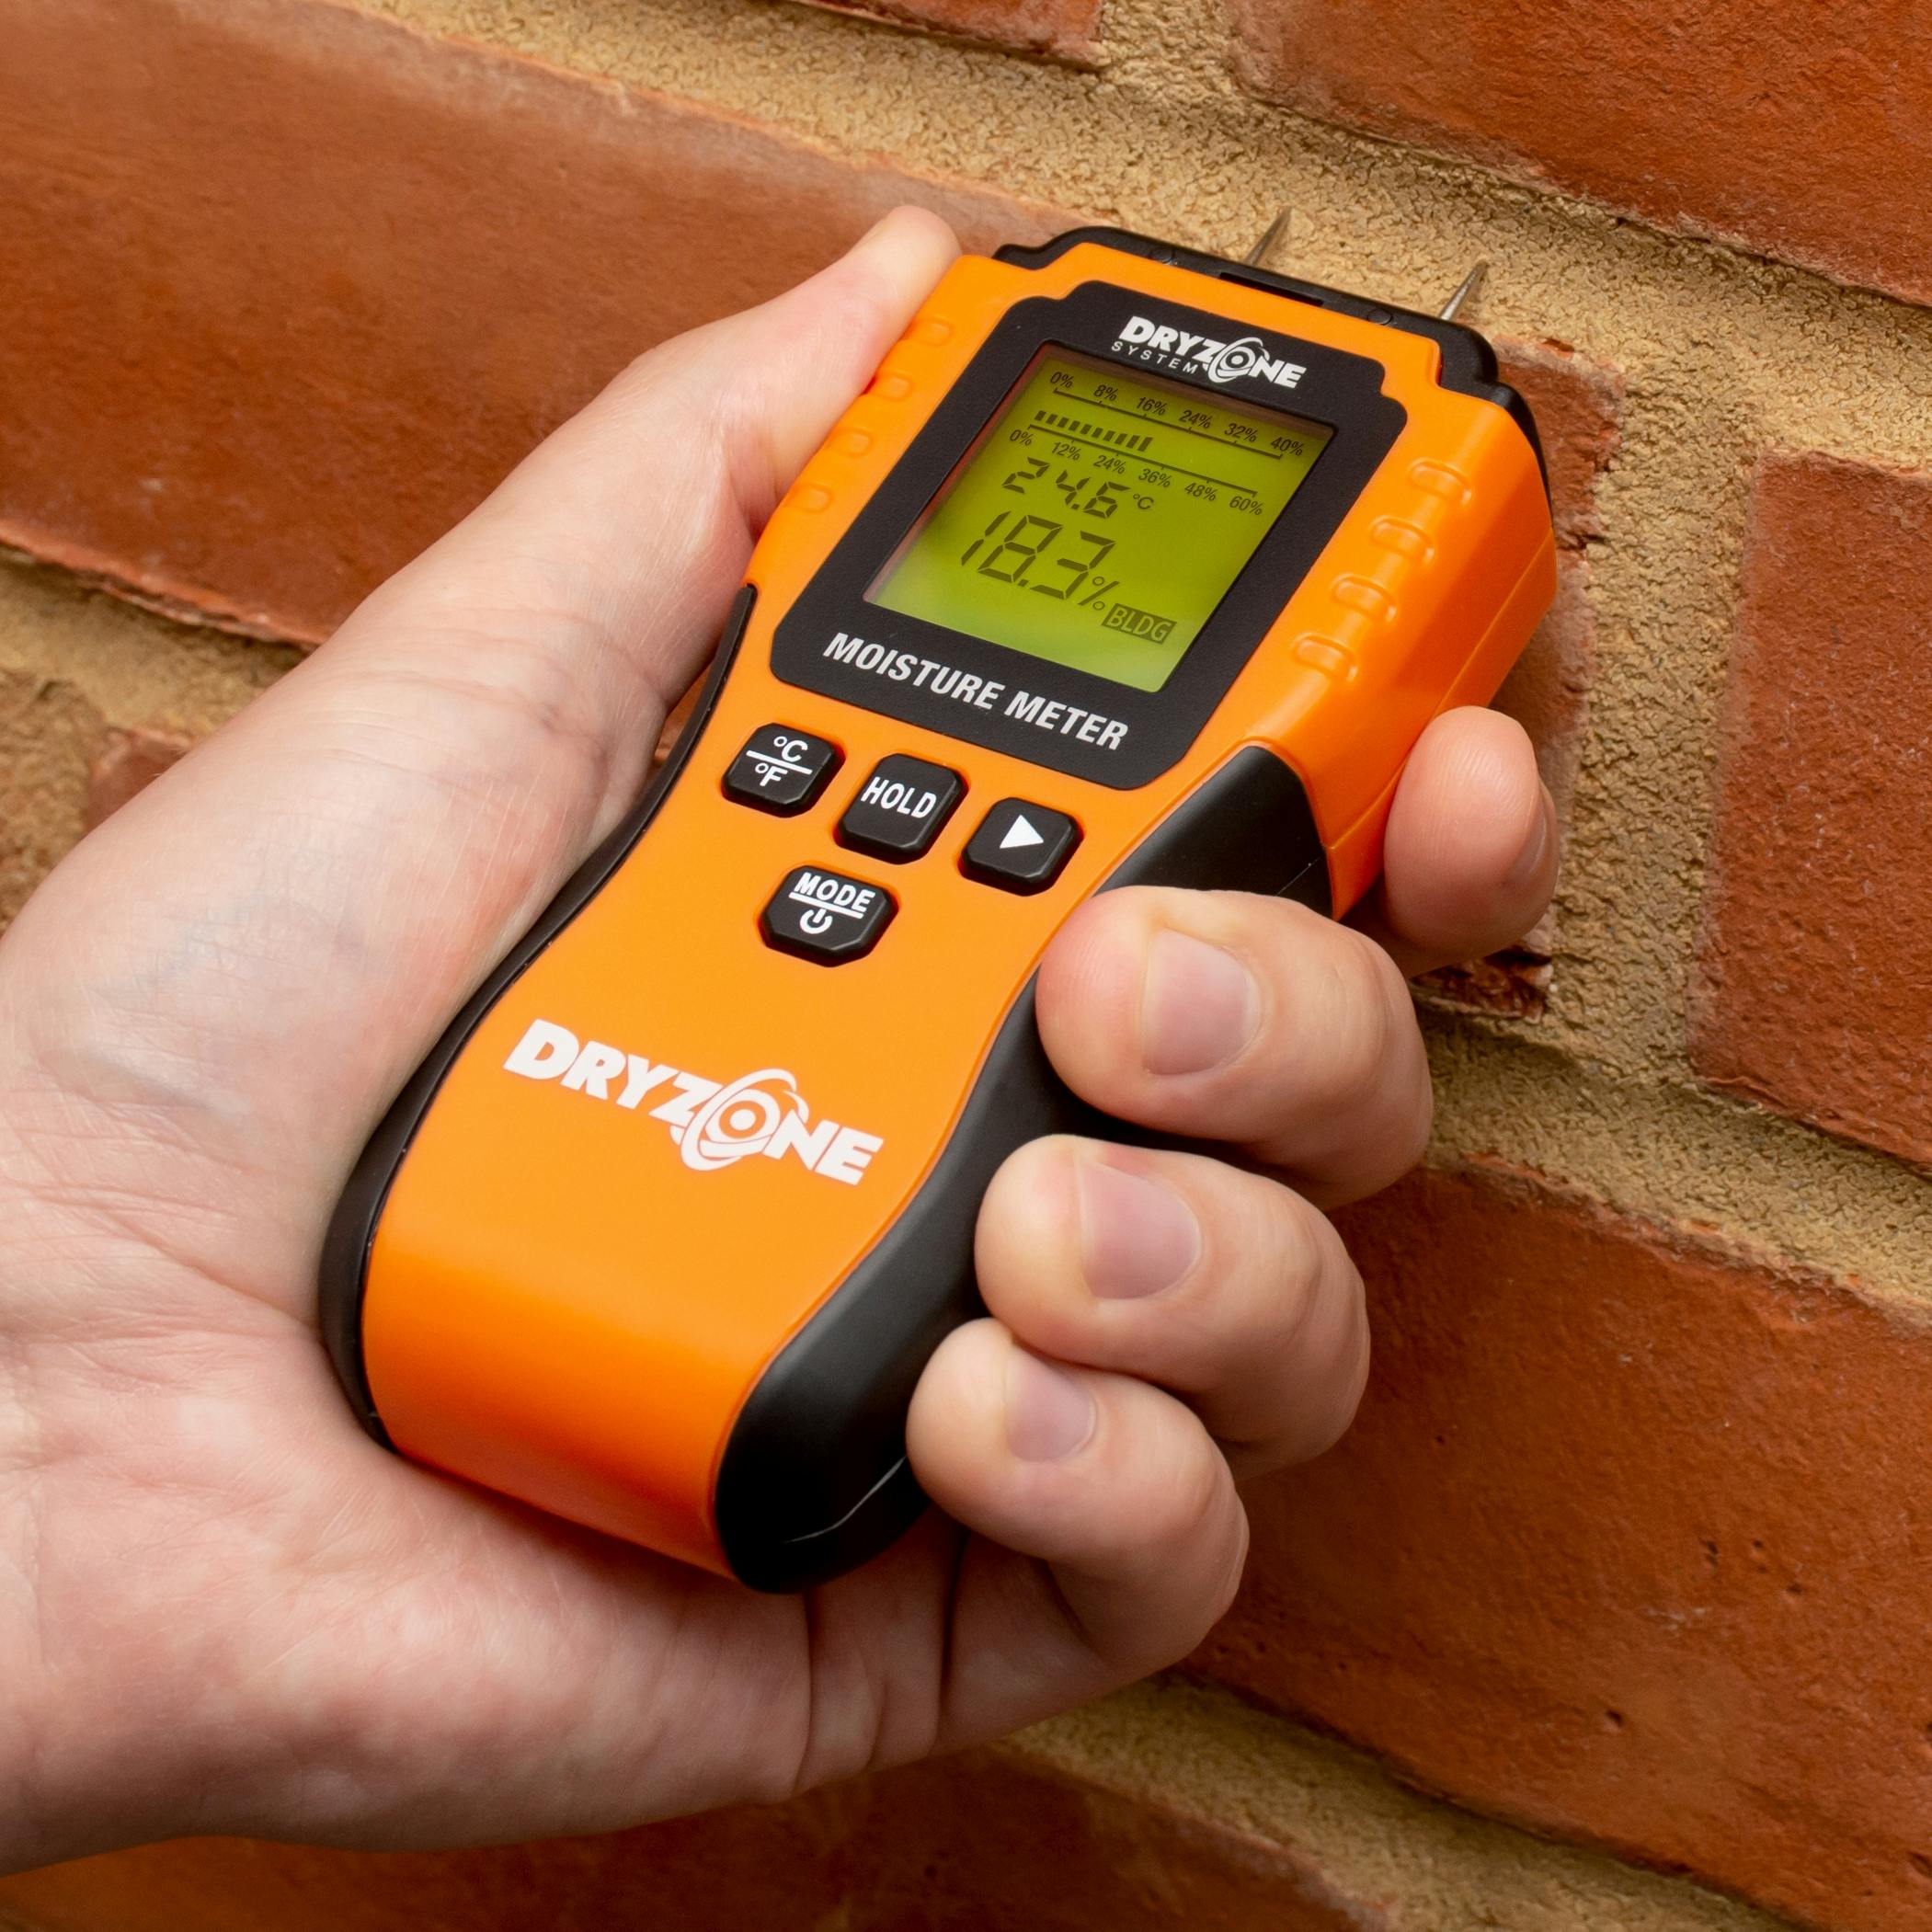 The Dryzone Moisture Meter in use